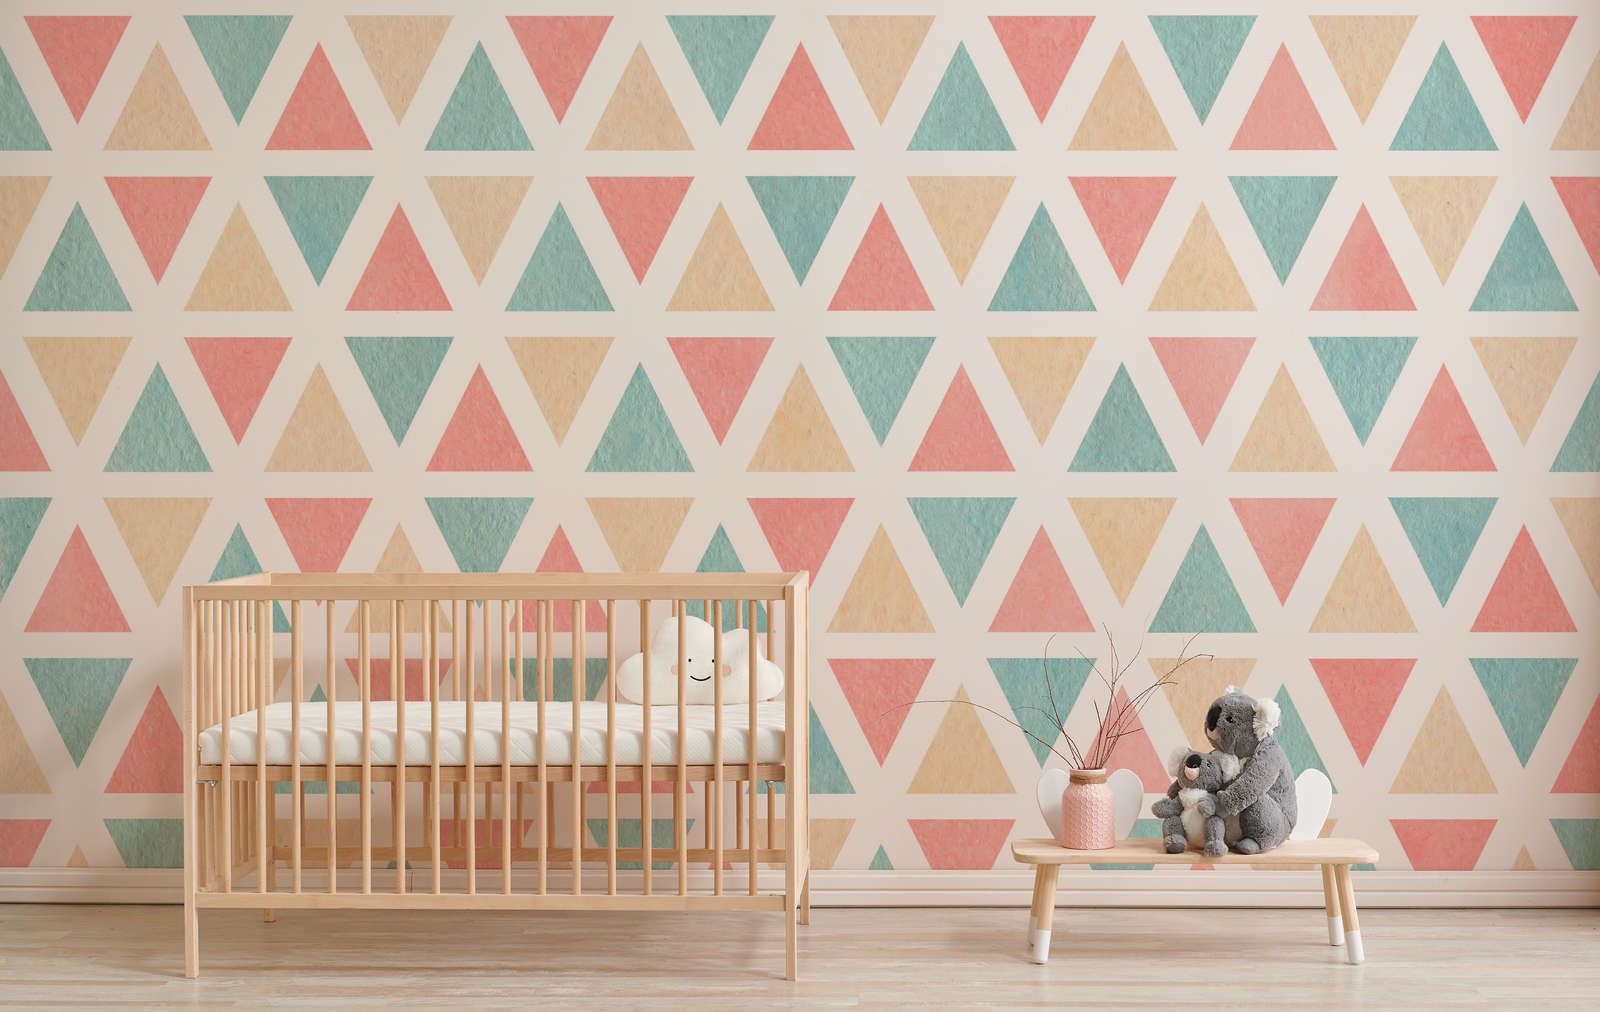             Photo wallpaper graphic pattern with colourful triangles - Smooth & slightly shiny non-woven
        